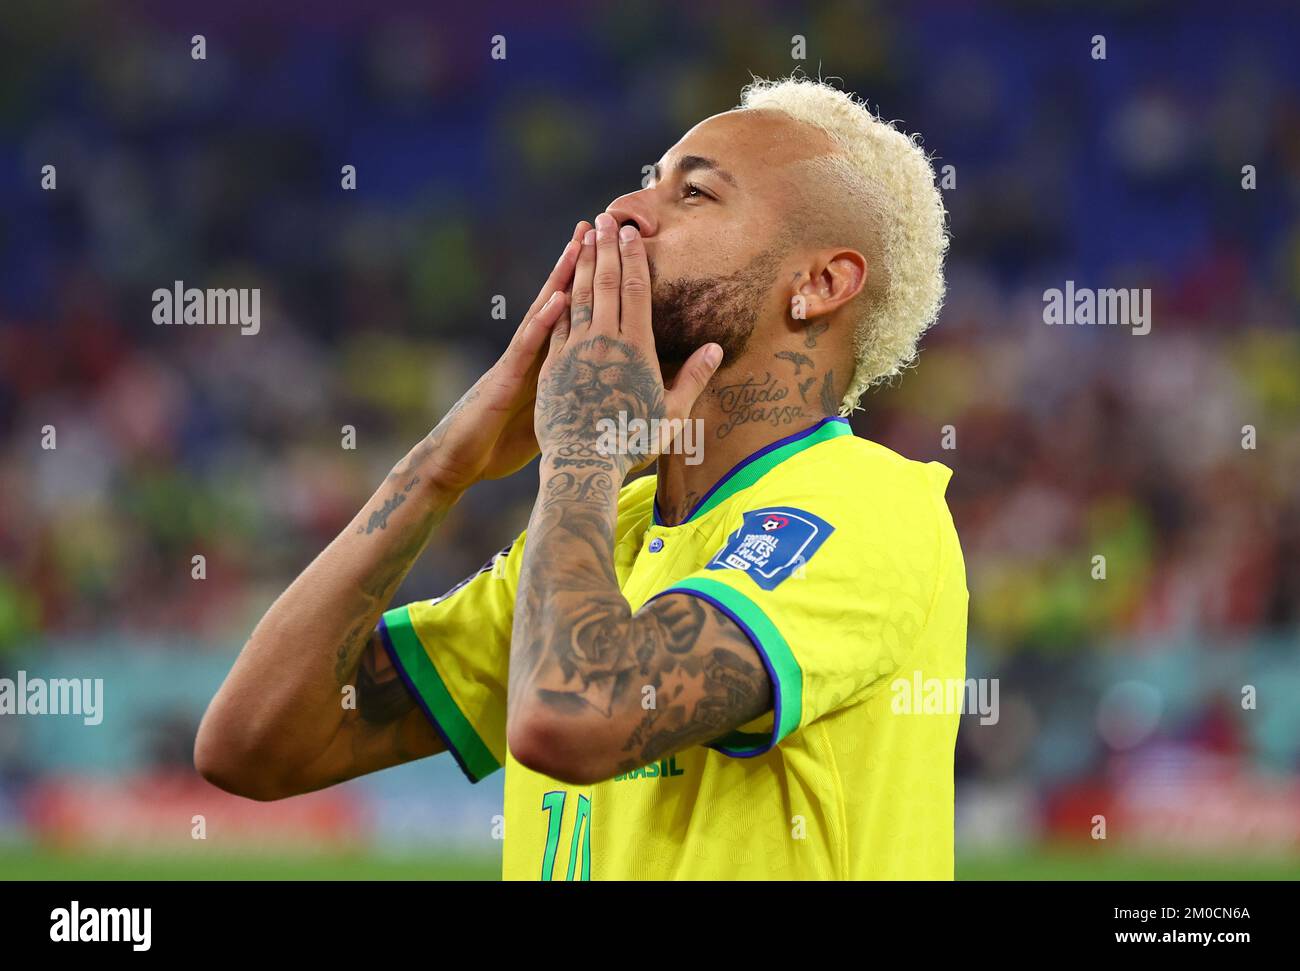 Doha, Qatar, 5th December 2022.  Neymar Jr of Brazil blows kisses during the FIFA World Cup 2022 match at Stadium 974, Doha. Picture credit should read: David Klein / Sportimage Stock Photo